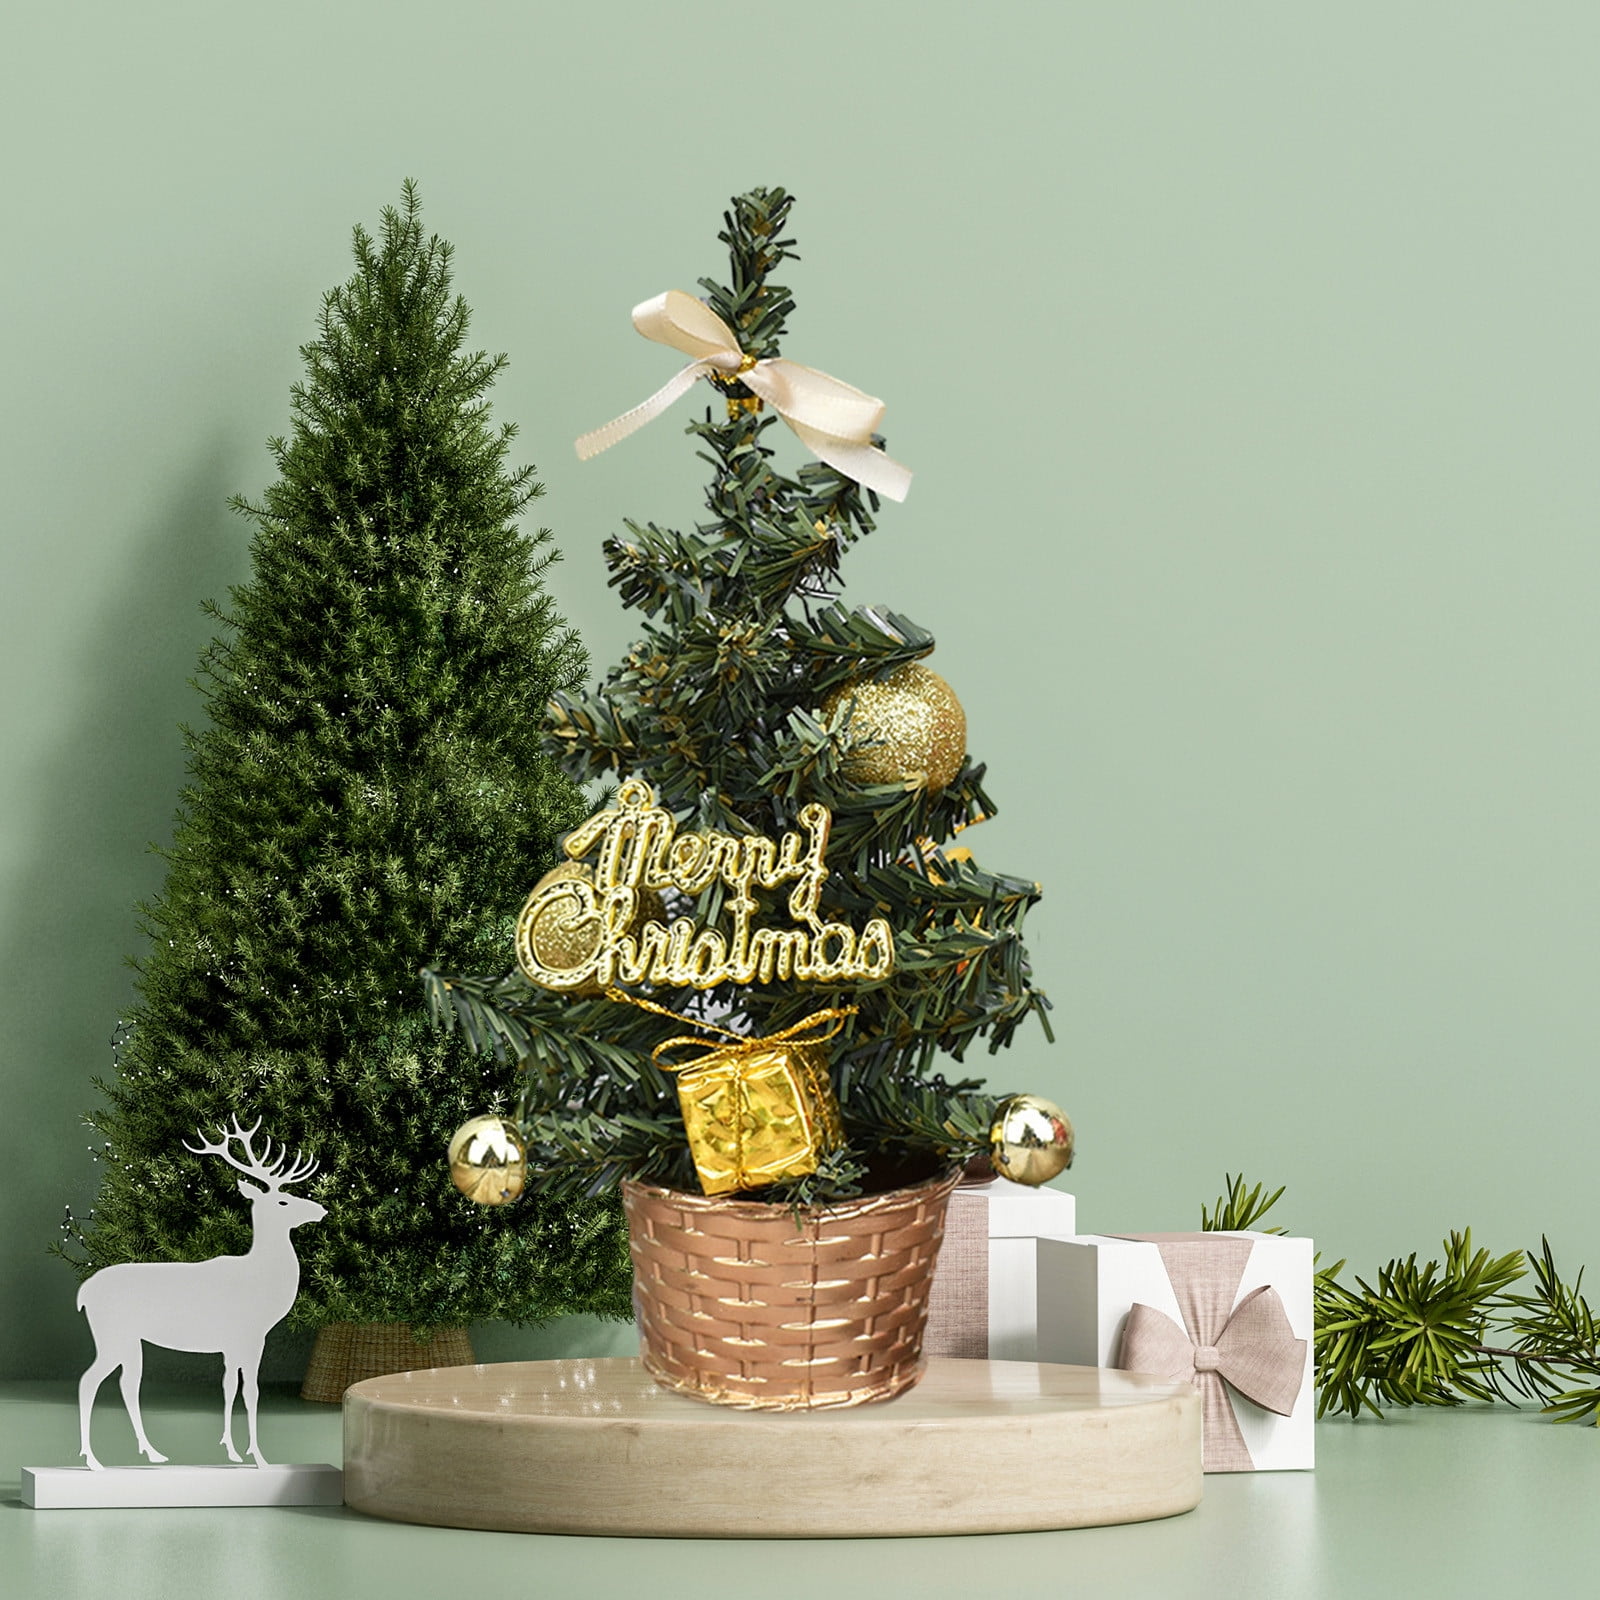 Miniature Christmas Tree Ornaments - Search Shopping